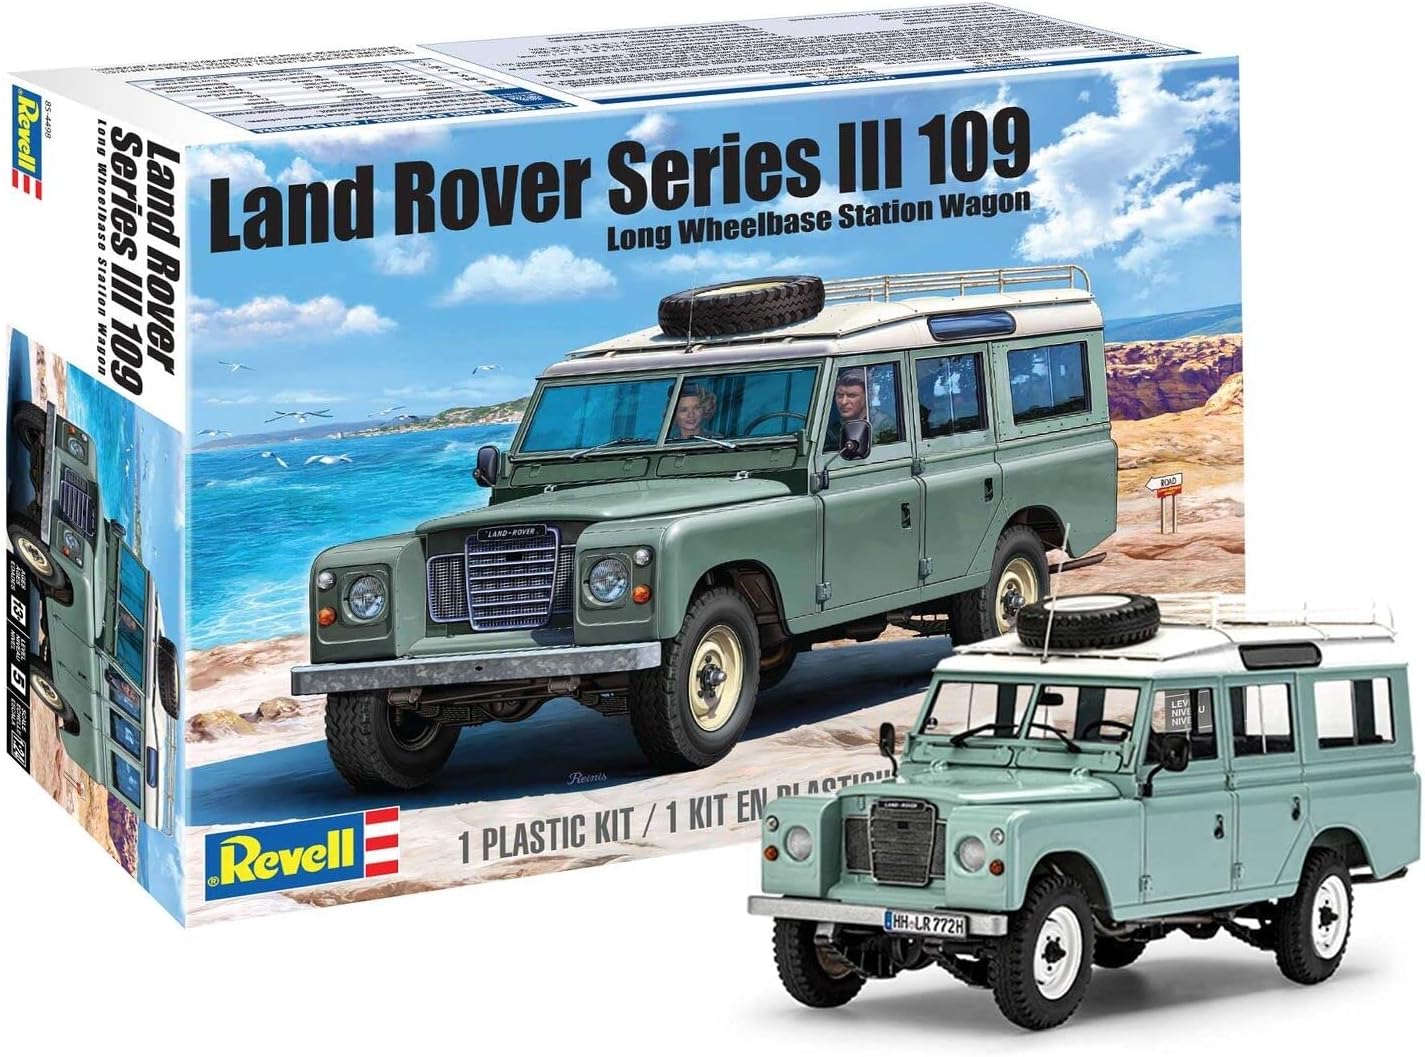 Revell 85-4498 Land Rover Series III 109 1/24 Scale Model Kit